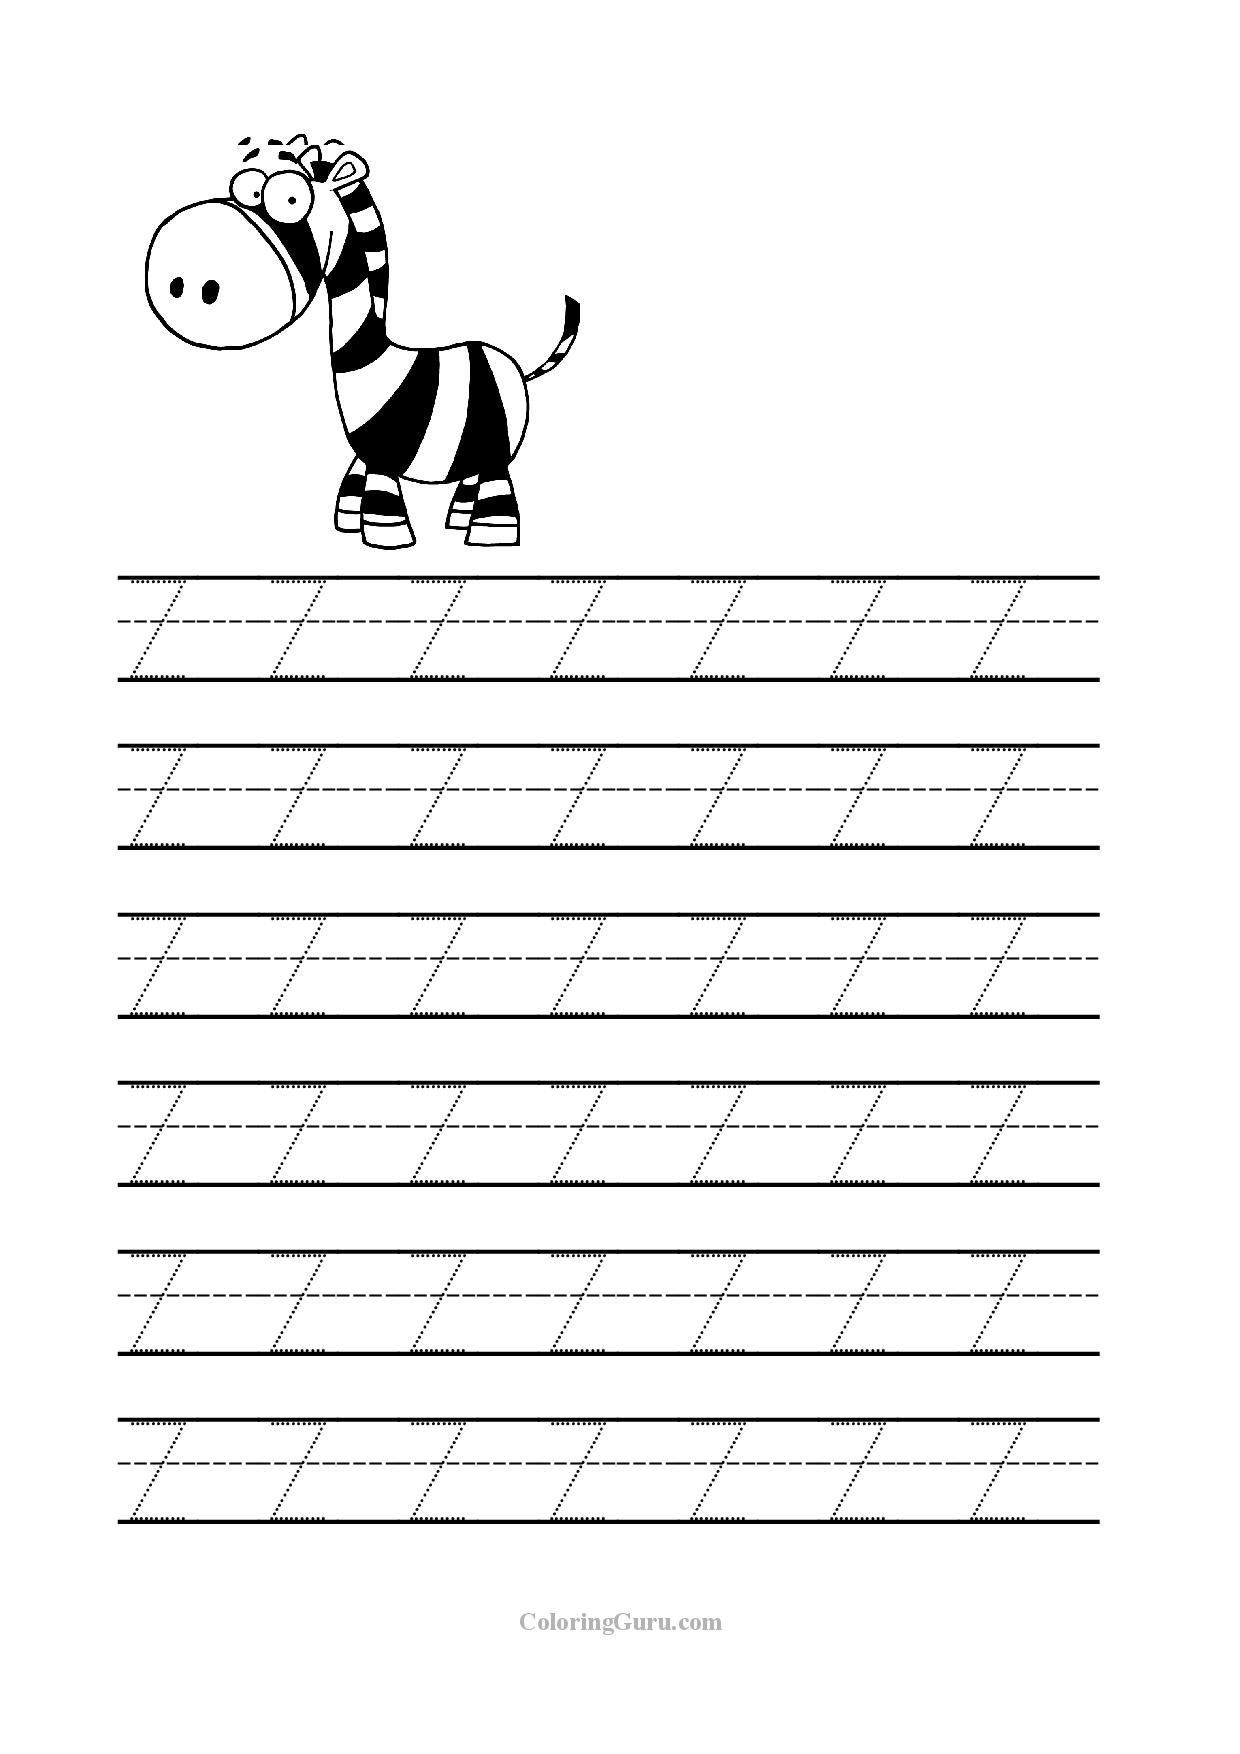 Free Printable Tracing Letter Z Worksheets For Preschool within Letter Tracing Z